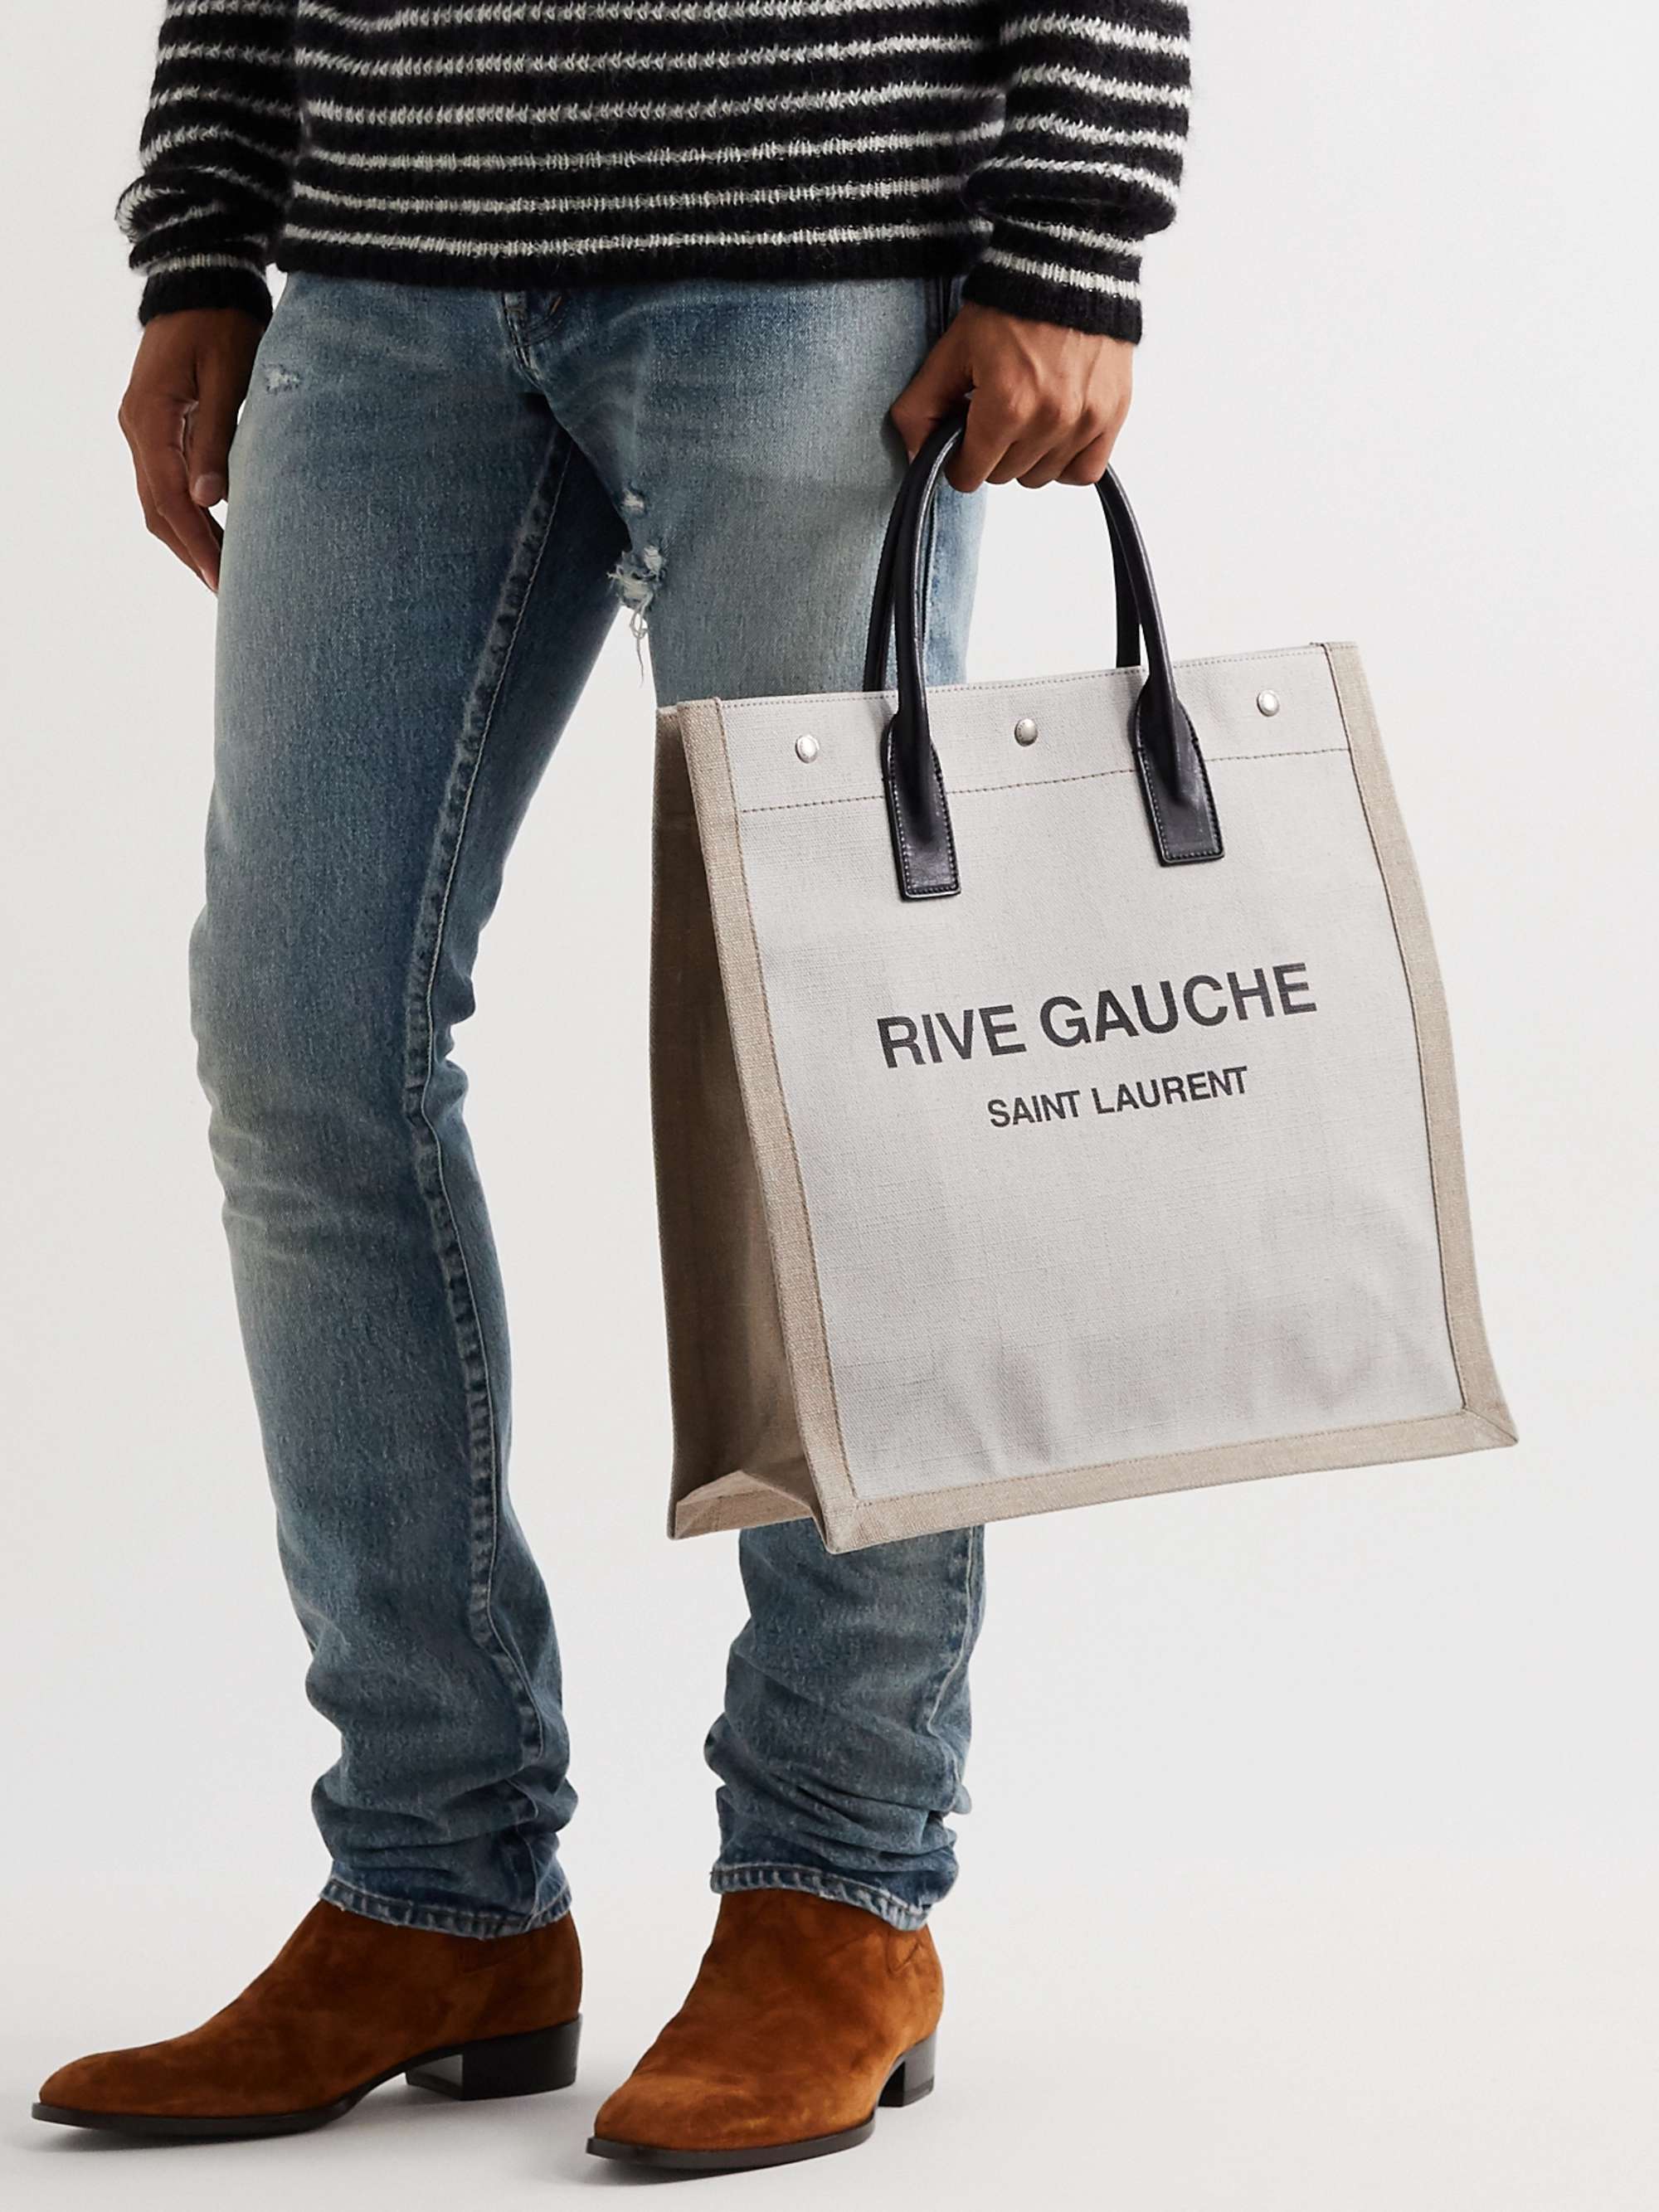 Noe Leather-Trimmed Logo-Print Canvas Tote Bag